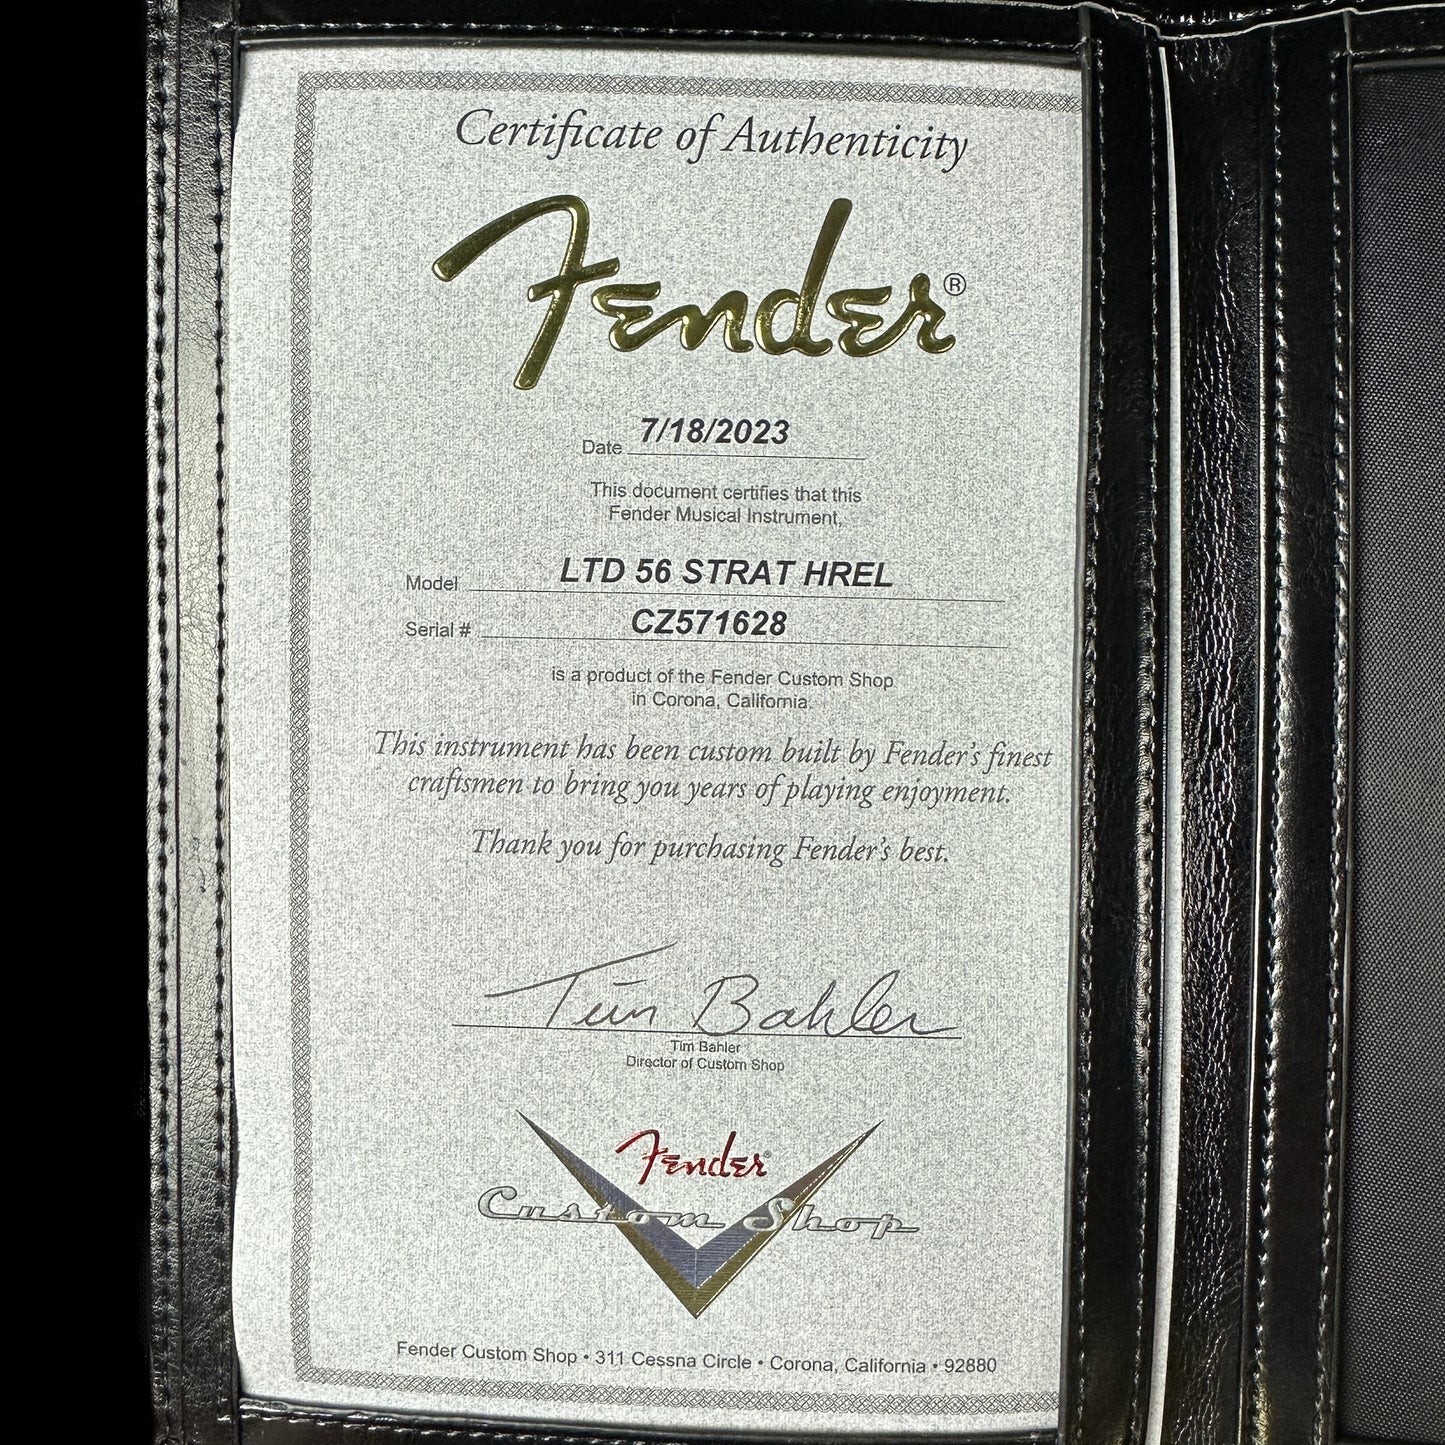 Certificate of authenticity for Fender Custom Shop Limited Edition '56 Strat Heavy Relic India Ivory.